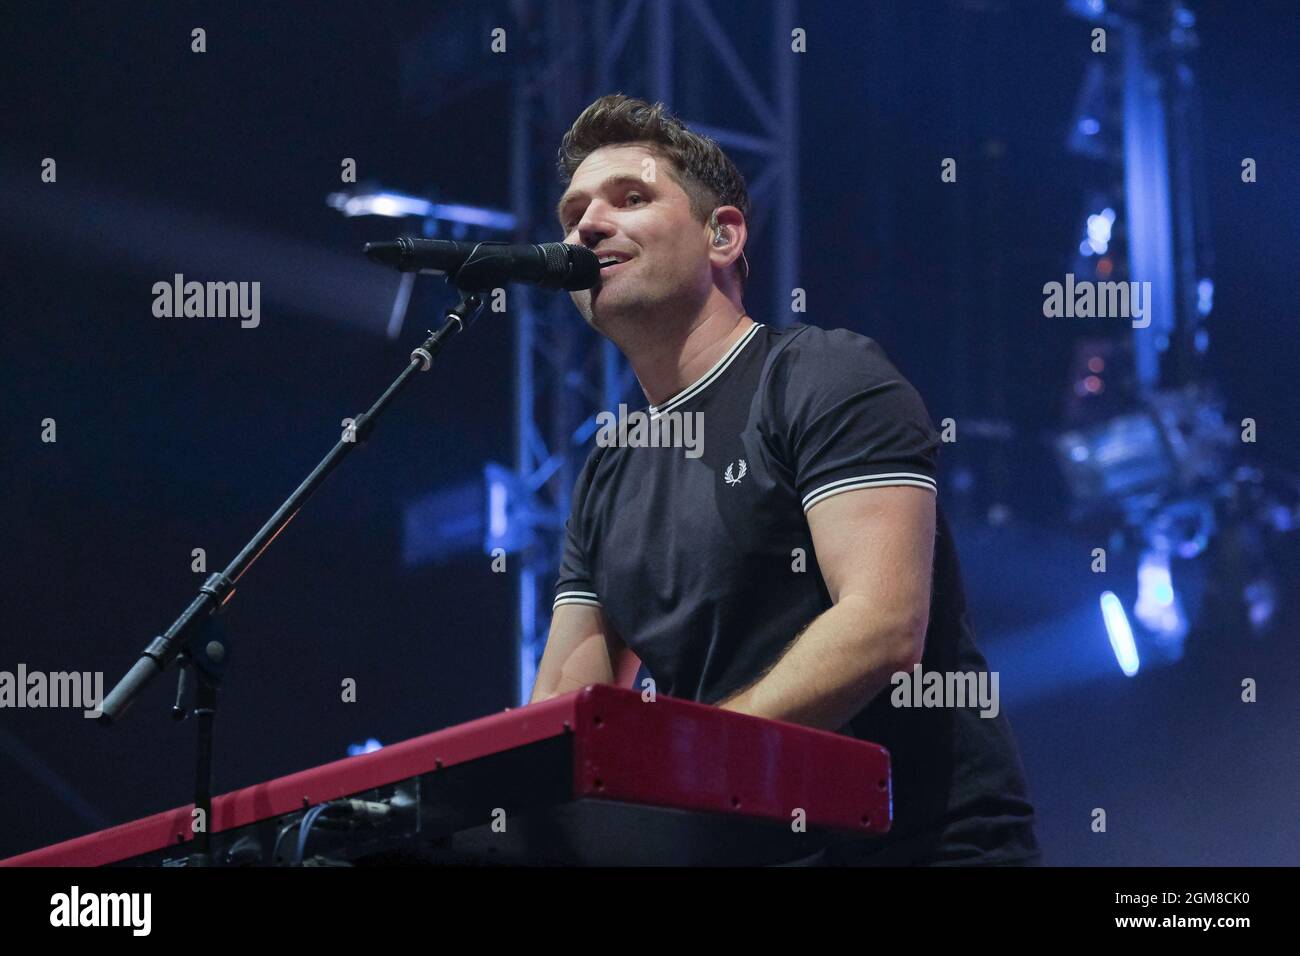 Roy Stride, lead singer, guitarist and keyboard player of Scouting for Girls pop band performs live on stage at the Isle of Wight Festival, Newport. (Photo by Dawn Fletcher-Park / SOPA Images/Sipa USA) Stock Photo